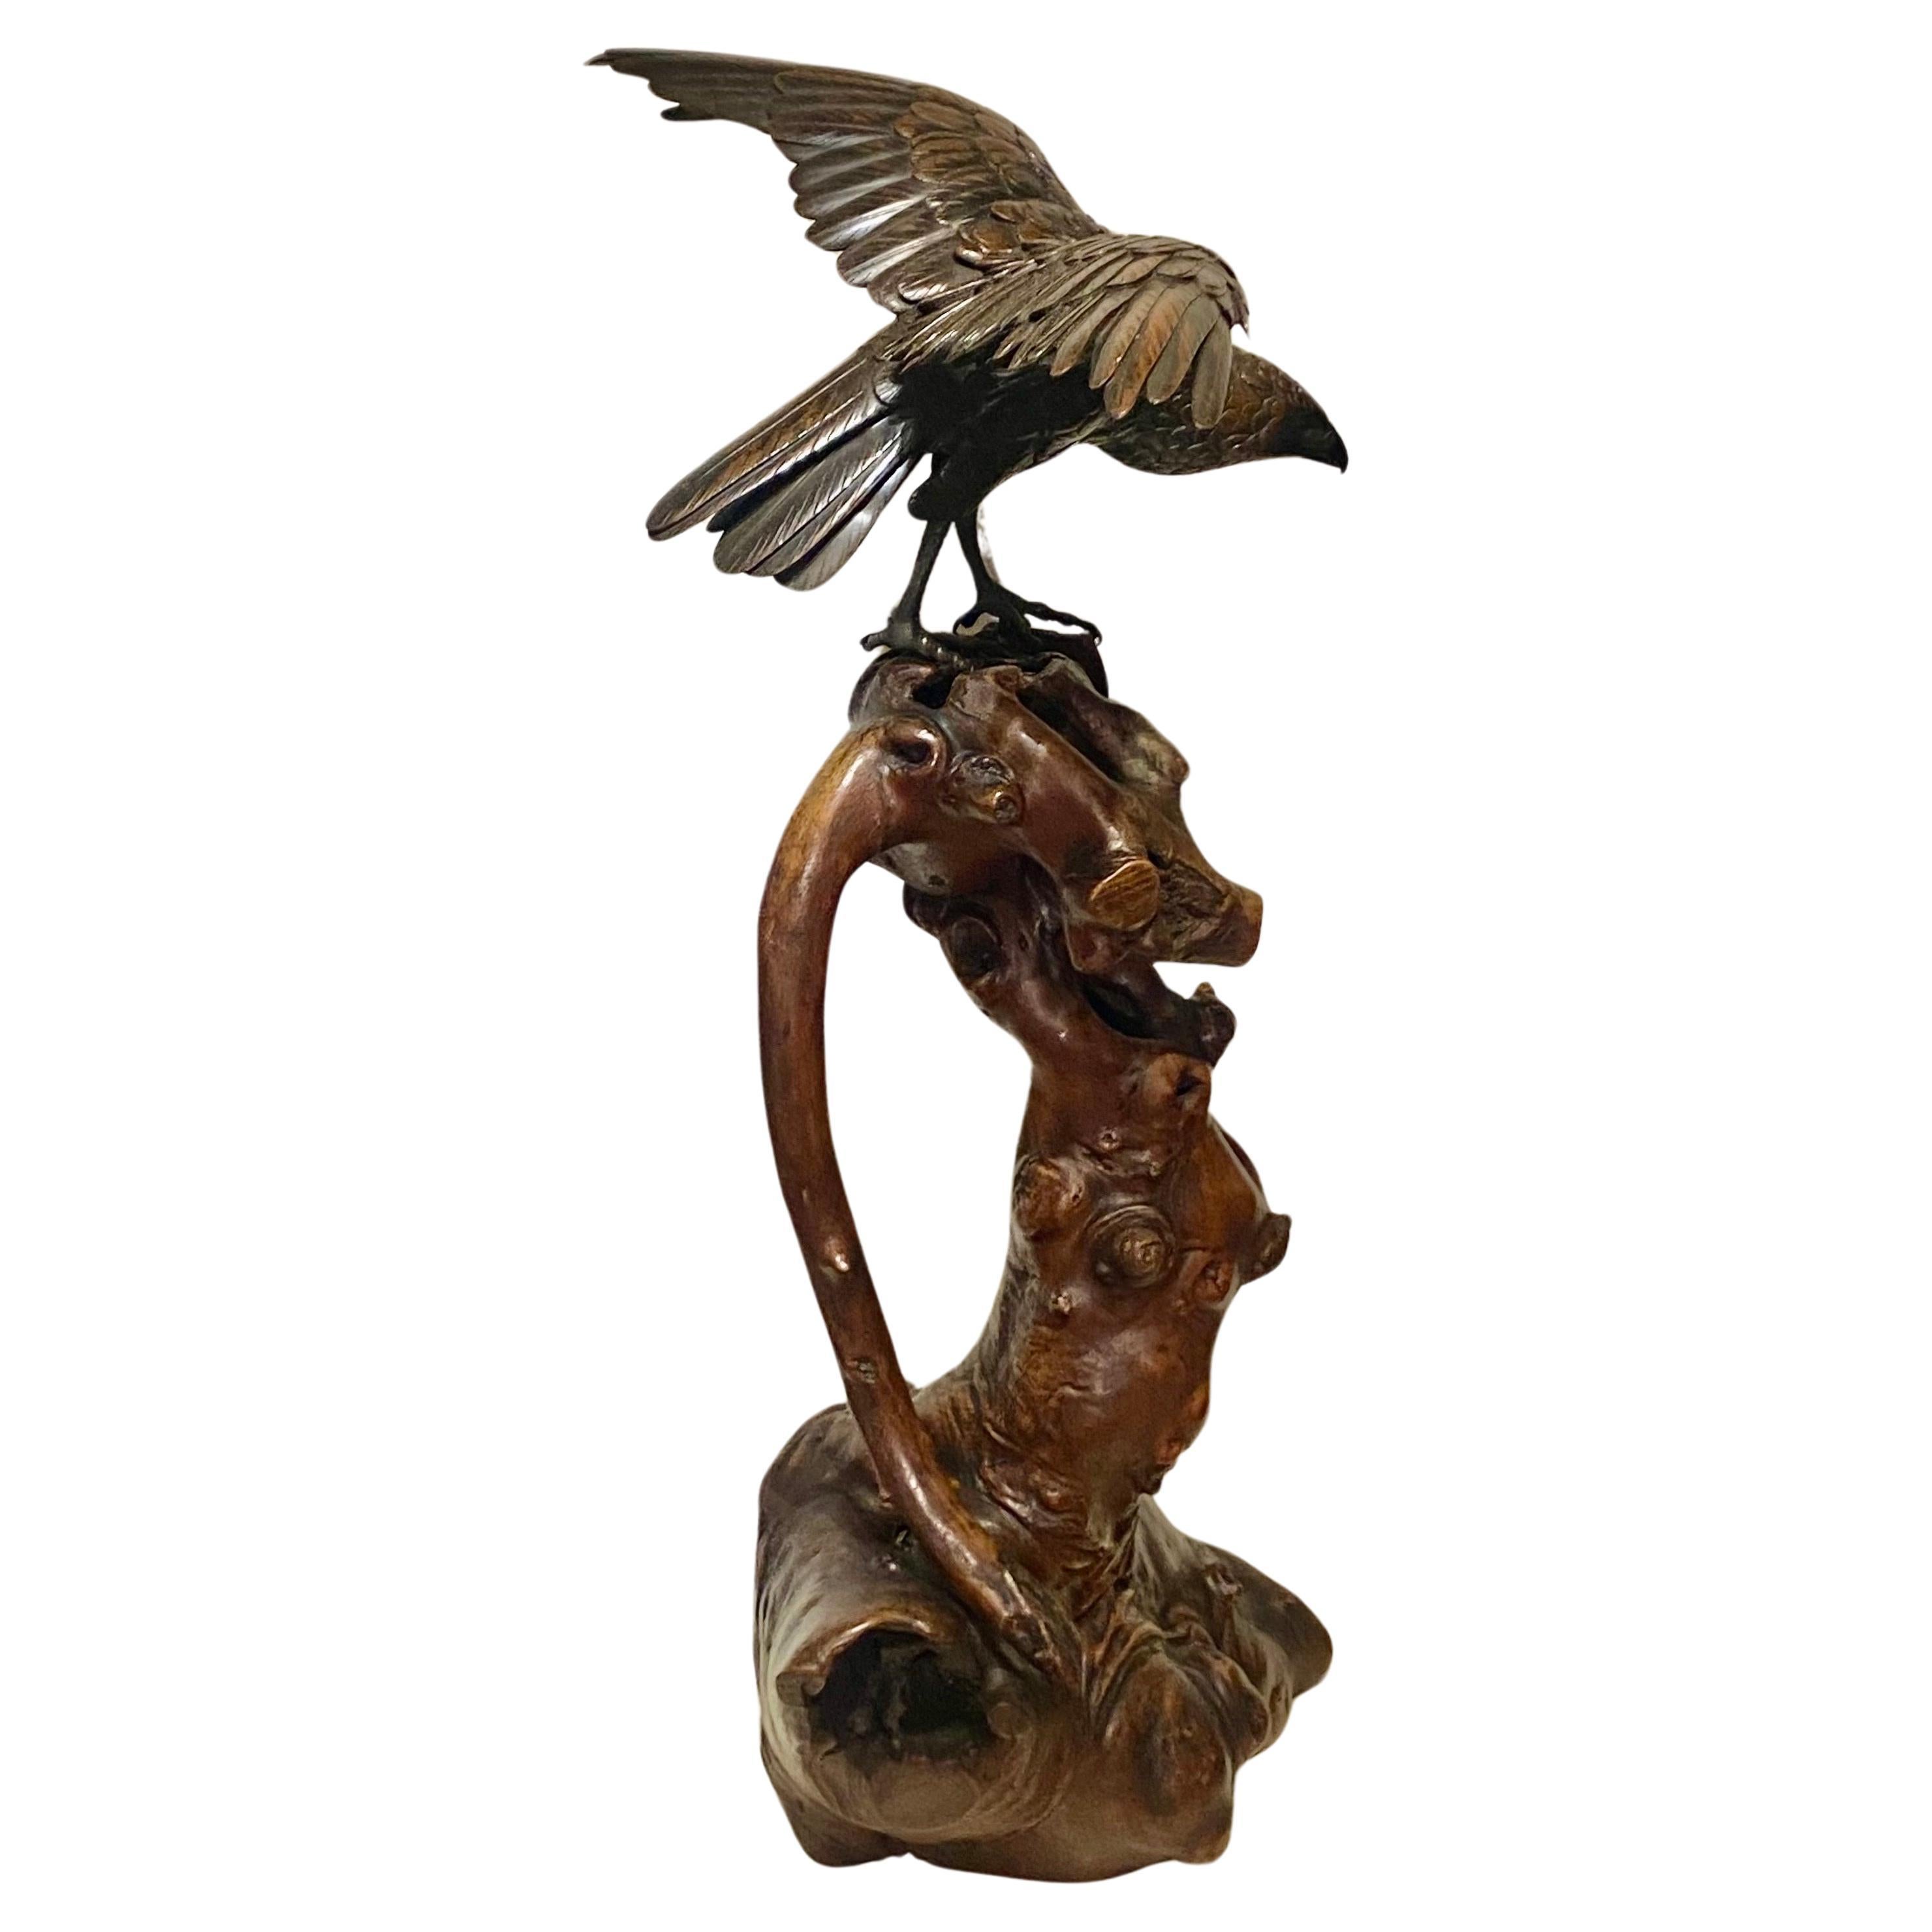 Japanese bronze Eagle modelled with its wings outstretched and head lowered, 
All the feather work is finely carved with rich brown patination, perched on a root wood base signed in a rectangular reserve plaque Gyoko 暁光, Meiji Period.
The artist